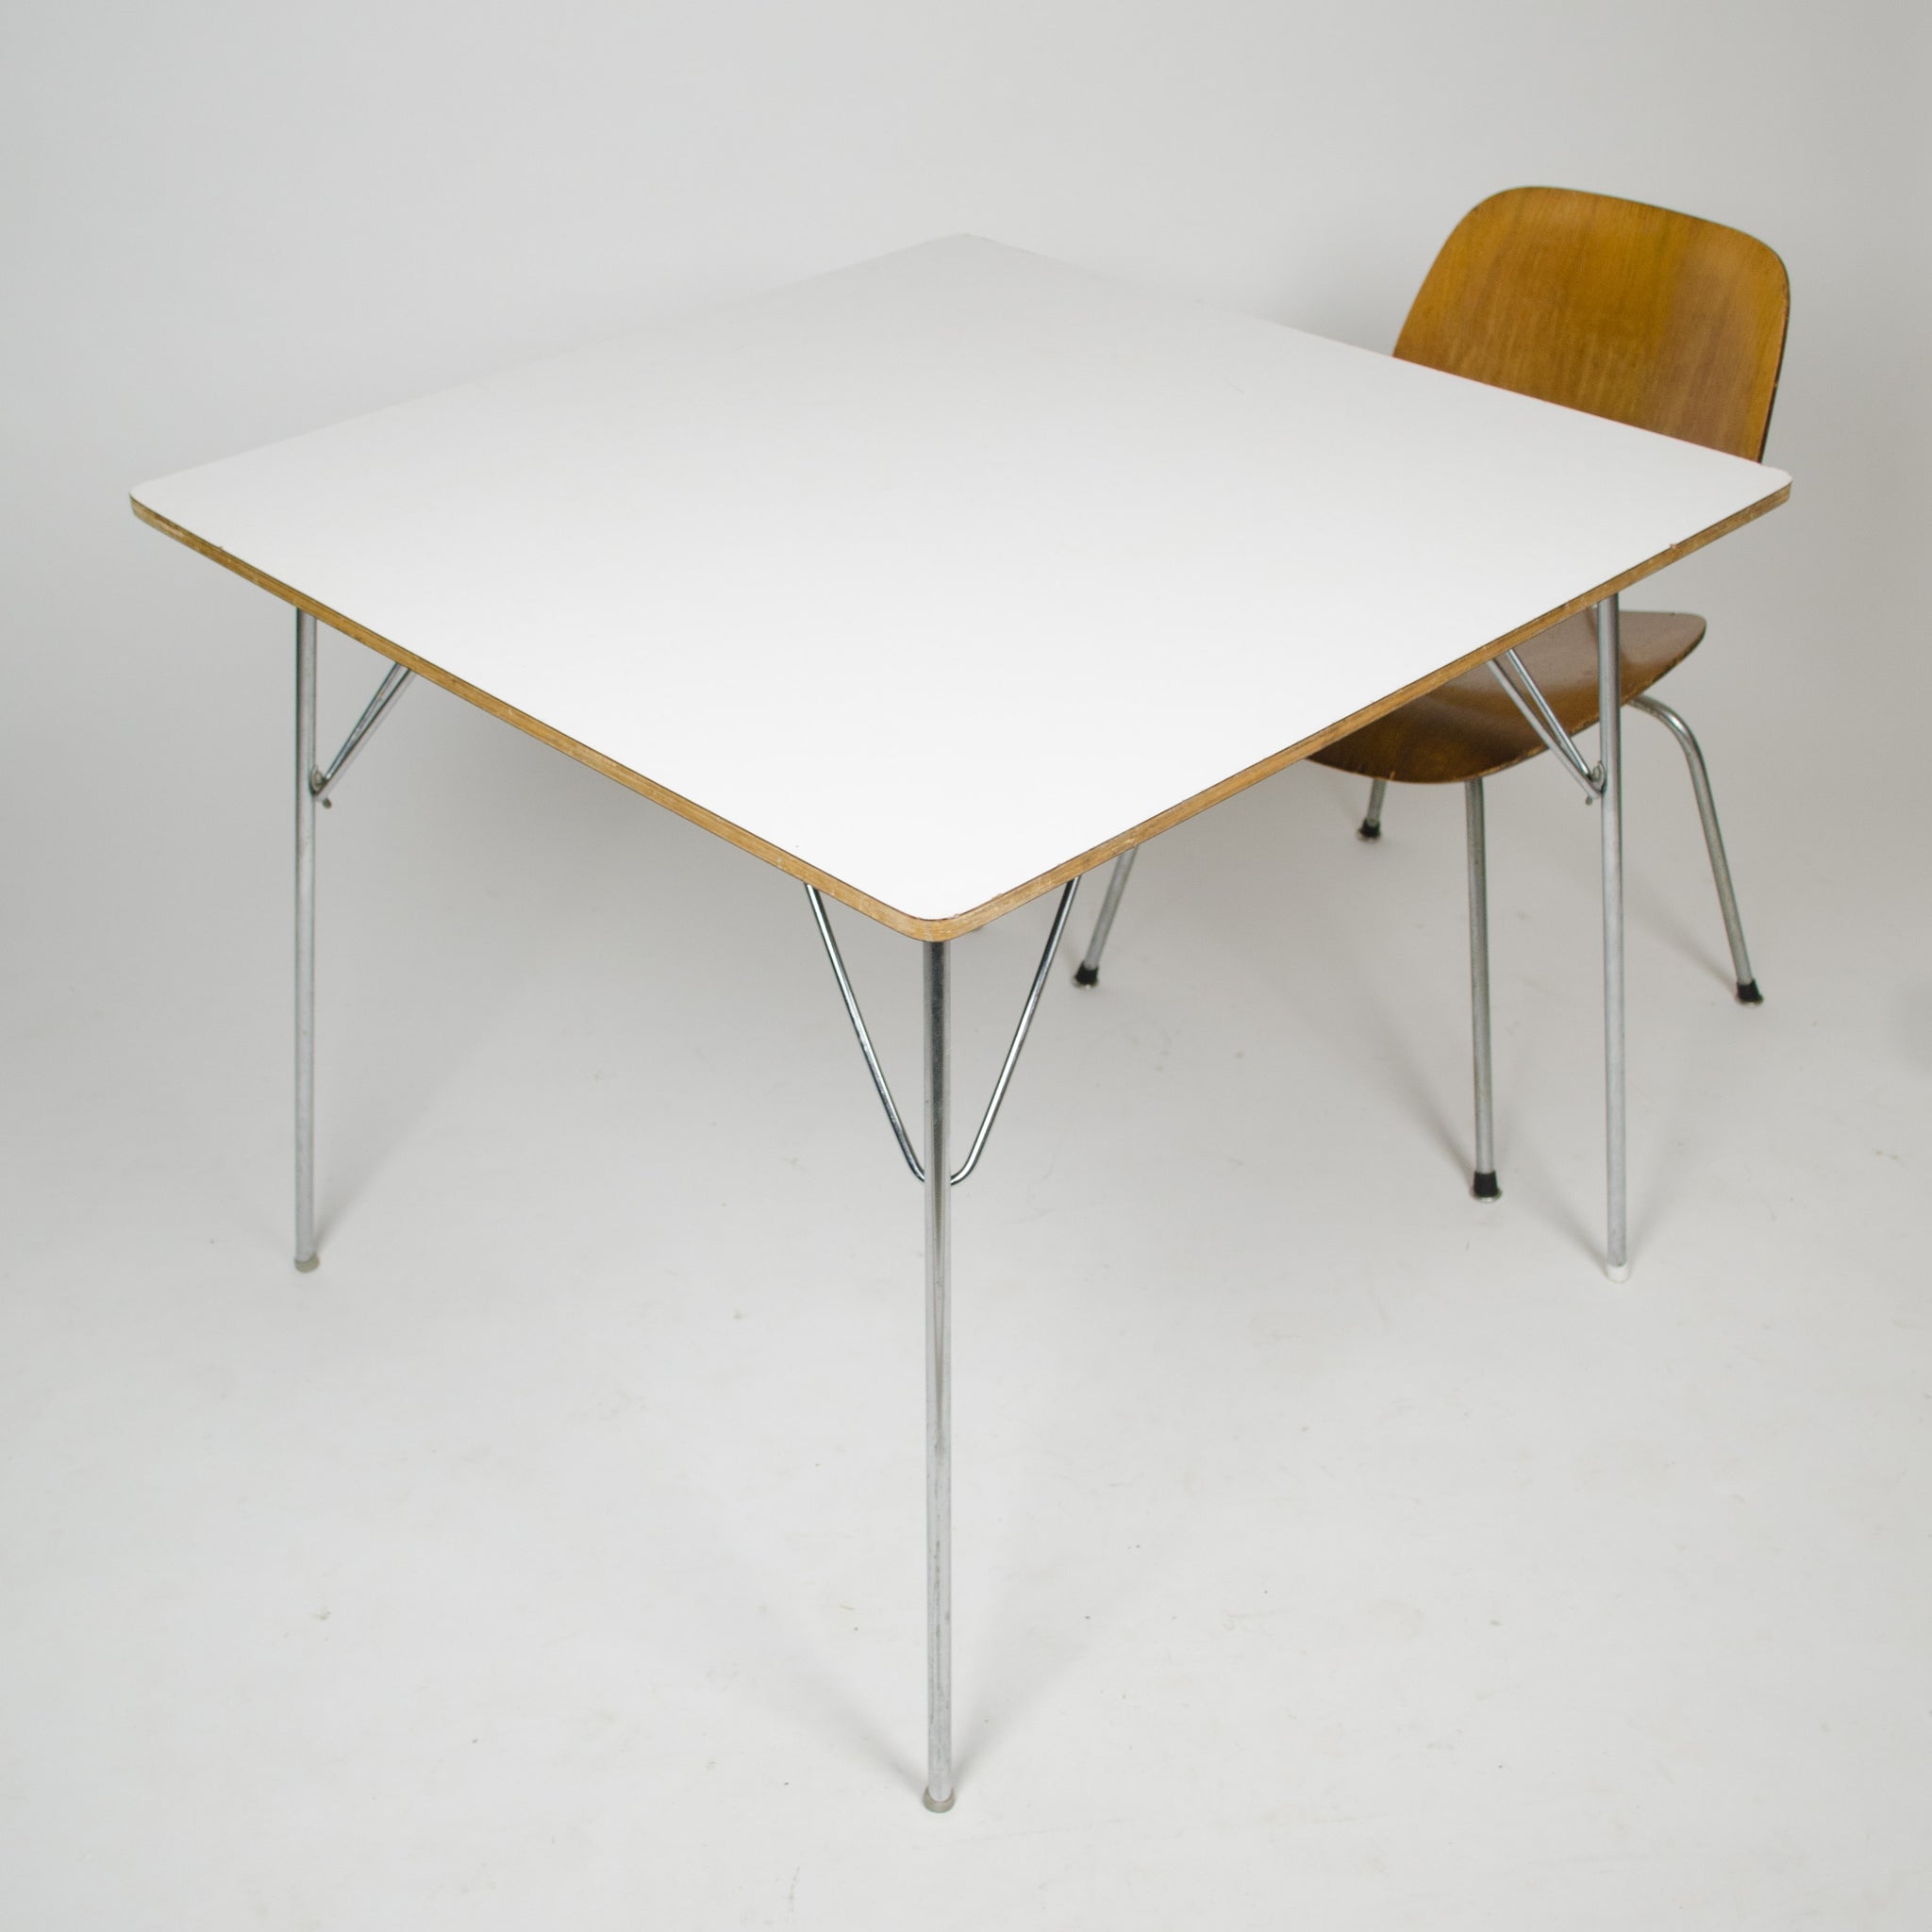 SOLD Eames Herman Miller Folding DTM 20 Square Dining Table Museum Quality